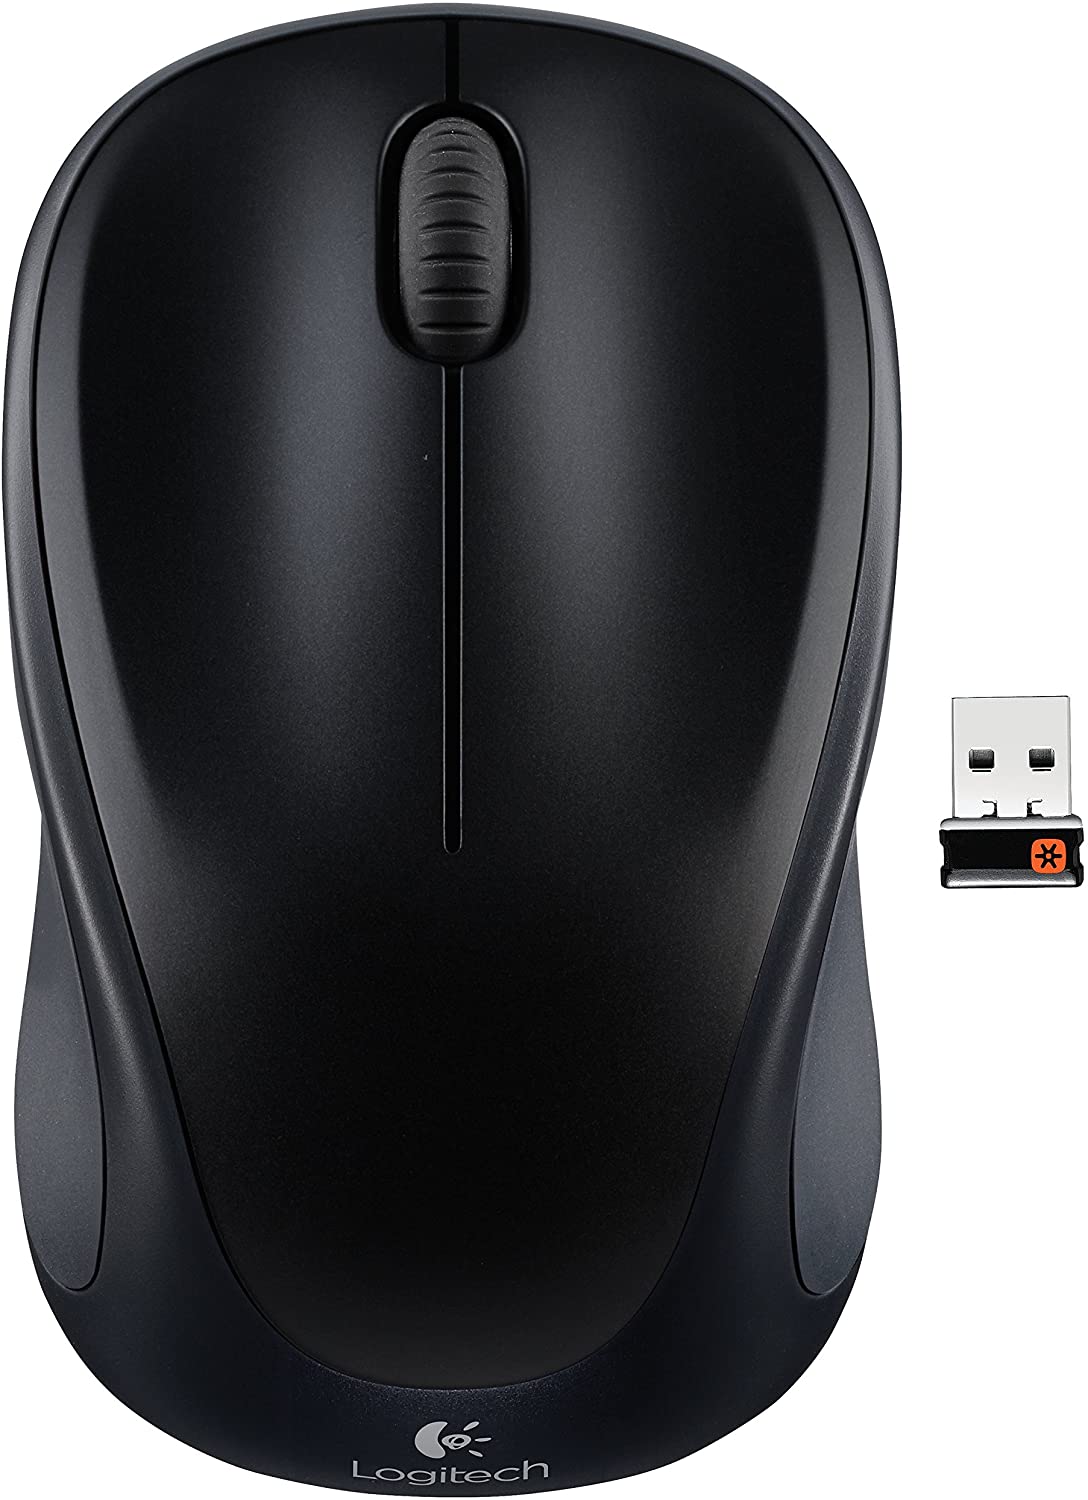 Logitech Wireless Mouse M317 and M325 with Unifying Receiver (various colors) $9.99